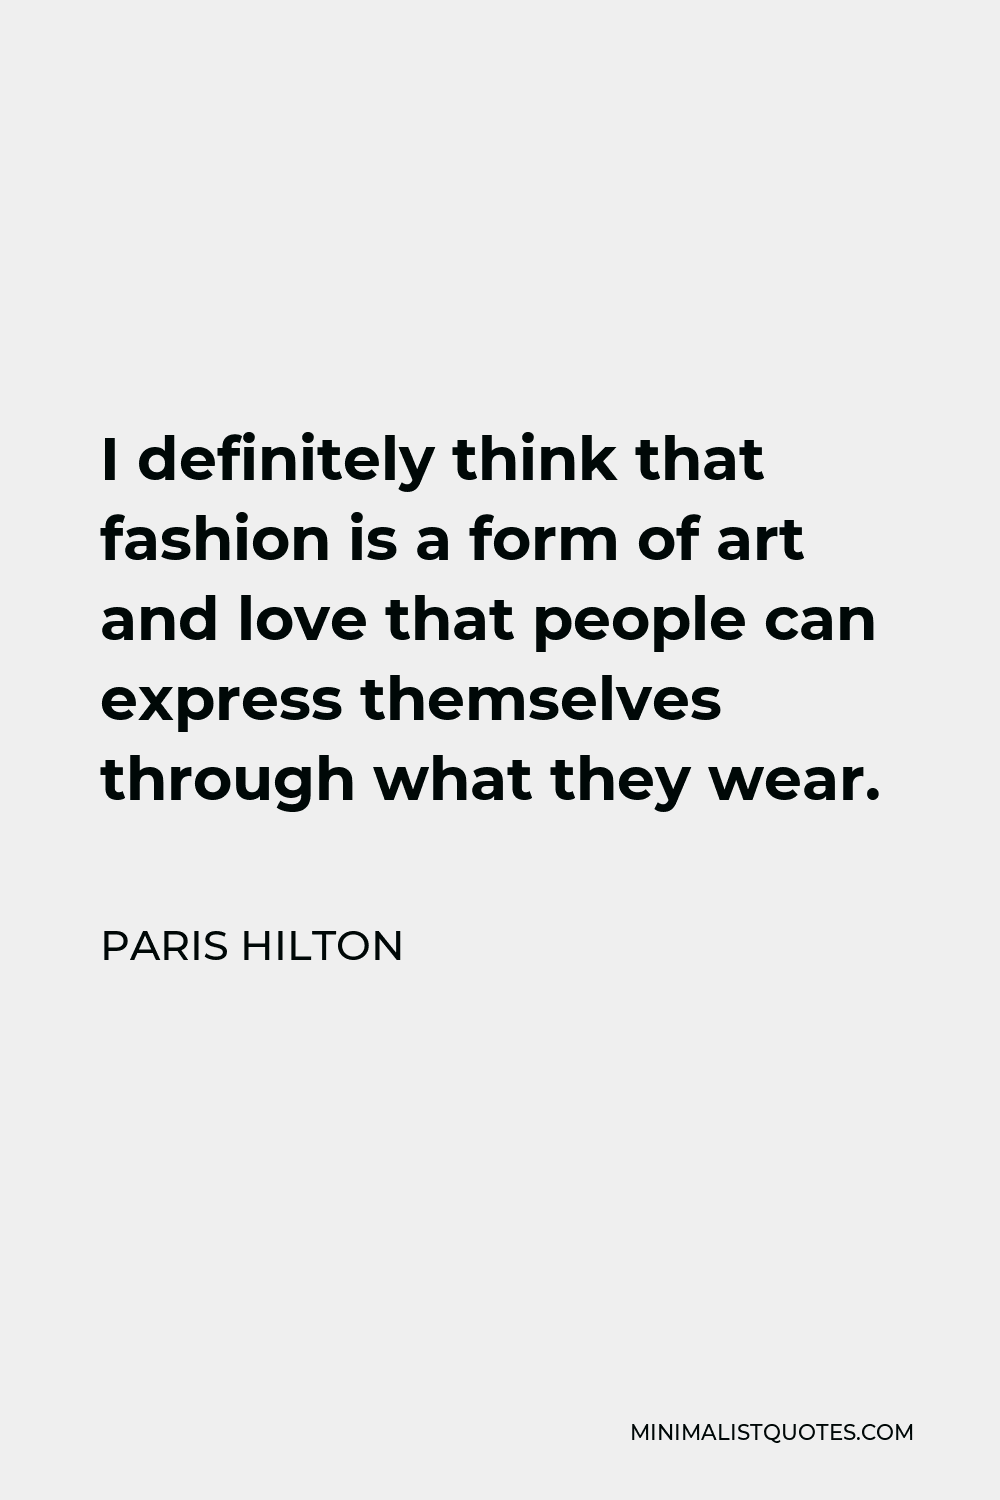 Paris Hilton Quote - I definitely think that fashion is a form of art and love that people can express themselves through what they wear.